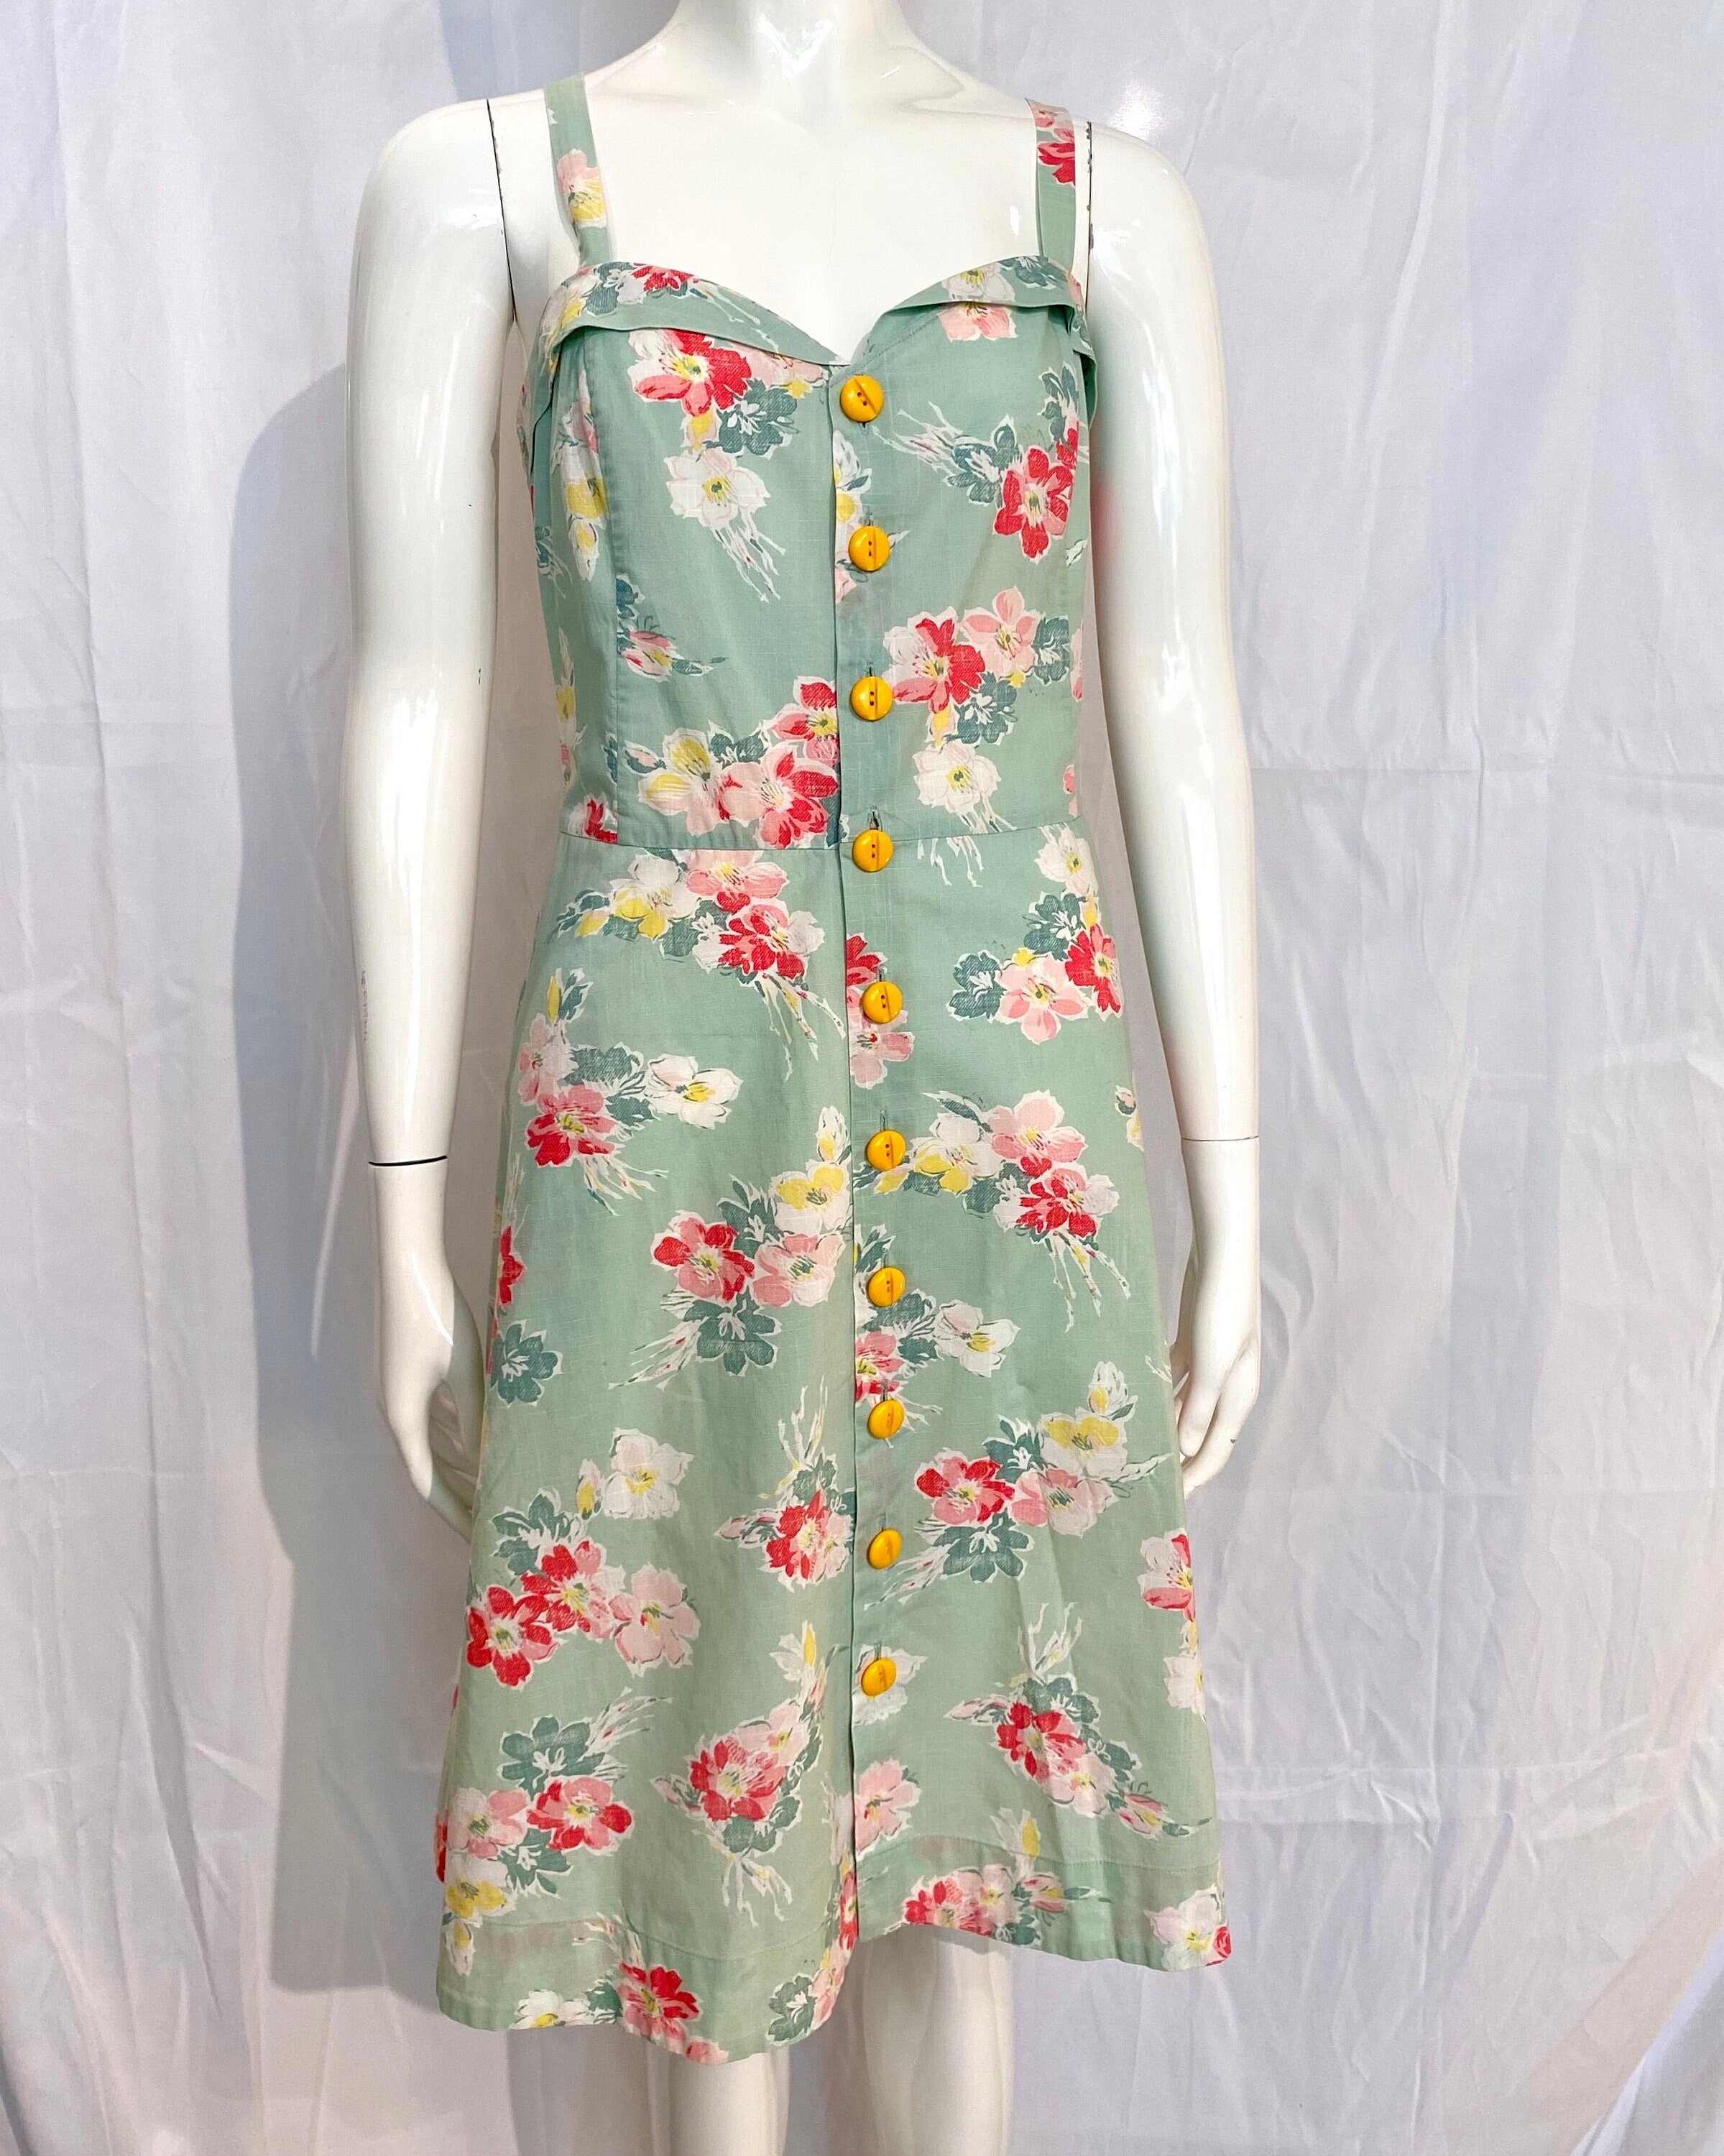 Retro 1940s Style Dress From Polo Ralph Lauren - Etsy